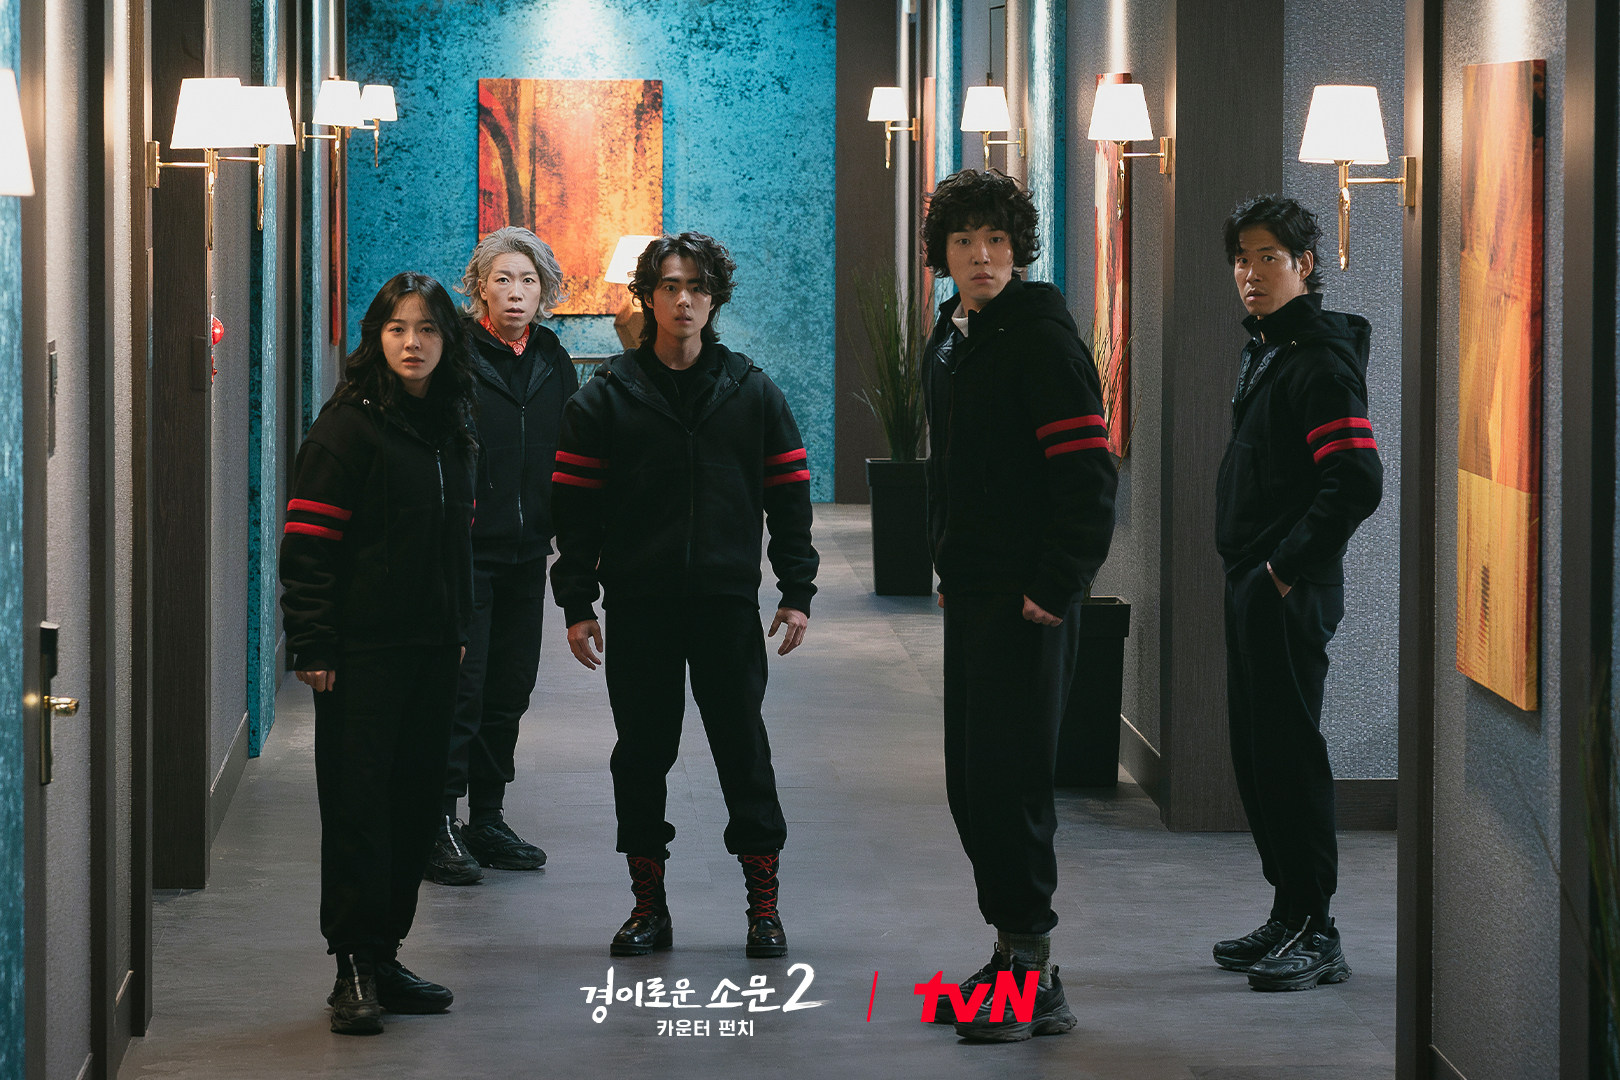 (From left) Kim Se-jeong, Yum Hye-ran, Jo Byeong-gyu, Yoo In-soo and Yu Jun-sang in a still from “The Uncanny Counter” season two.